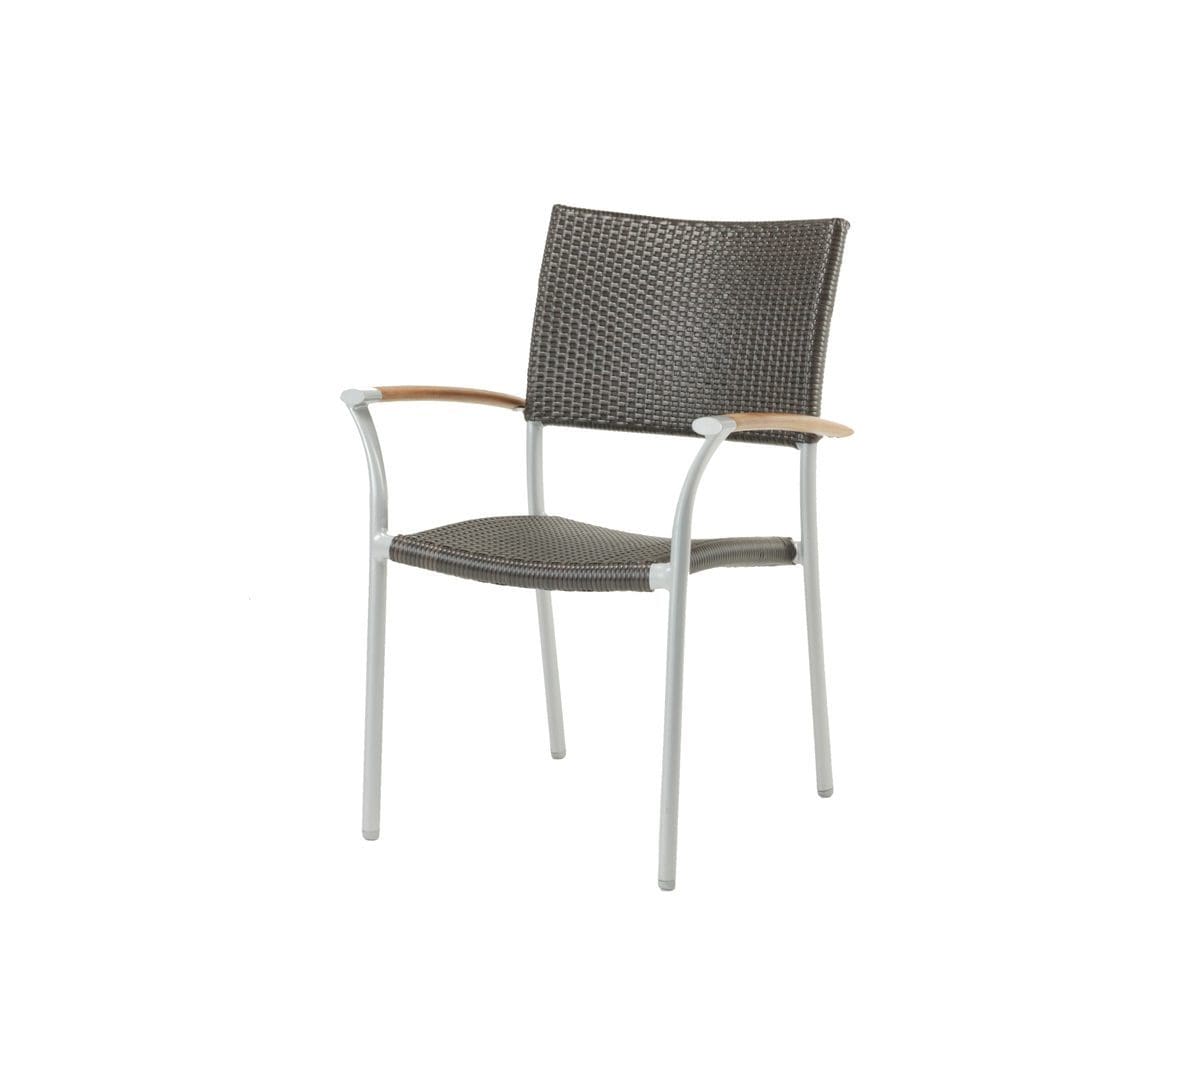 Ratana Dining New Roma Stacking Arm Chair  w/Durawood Armrest Woven